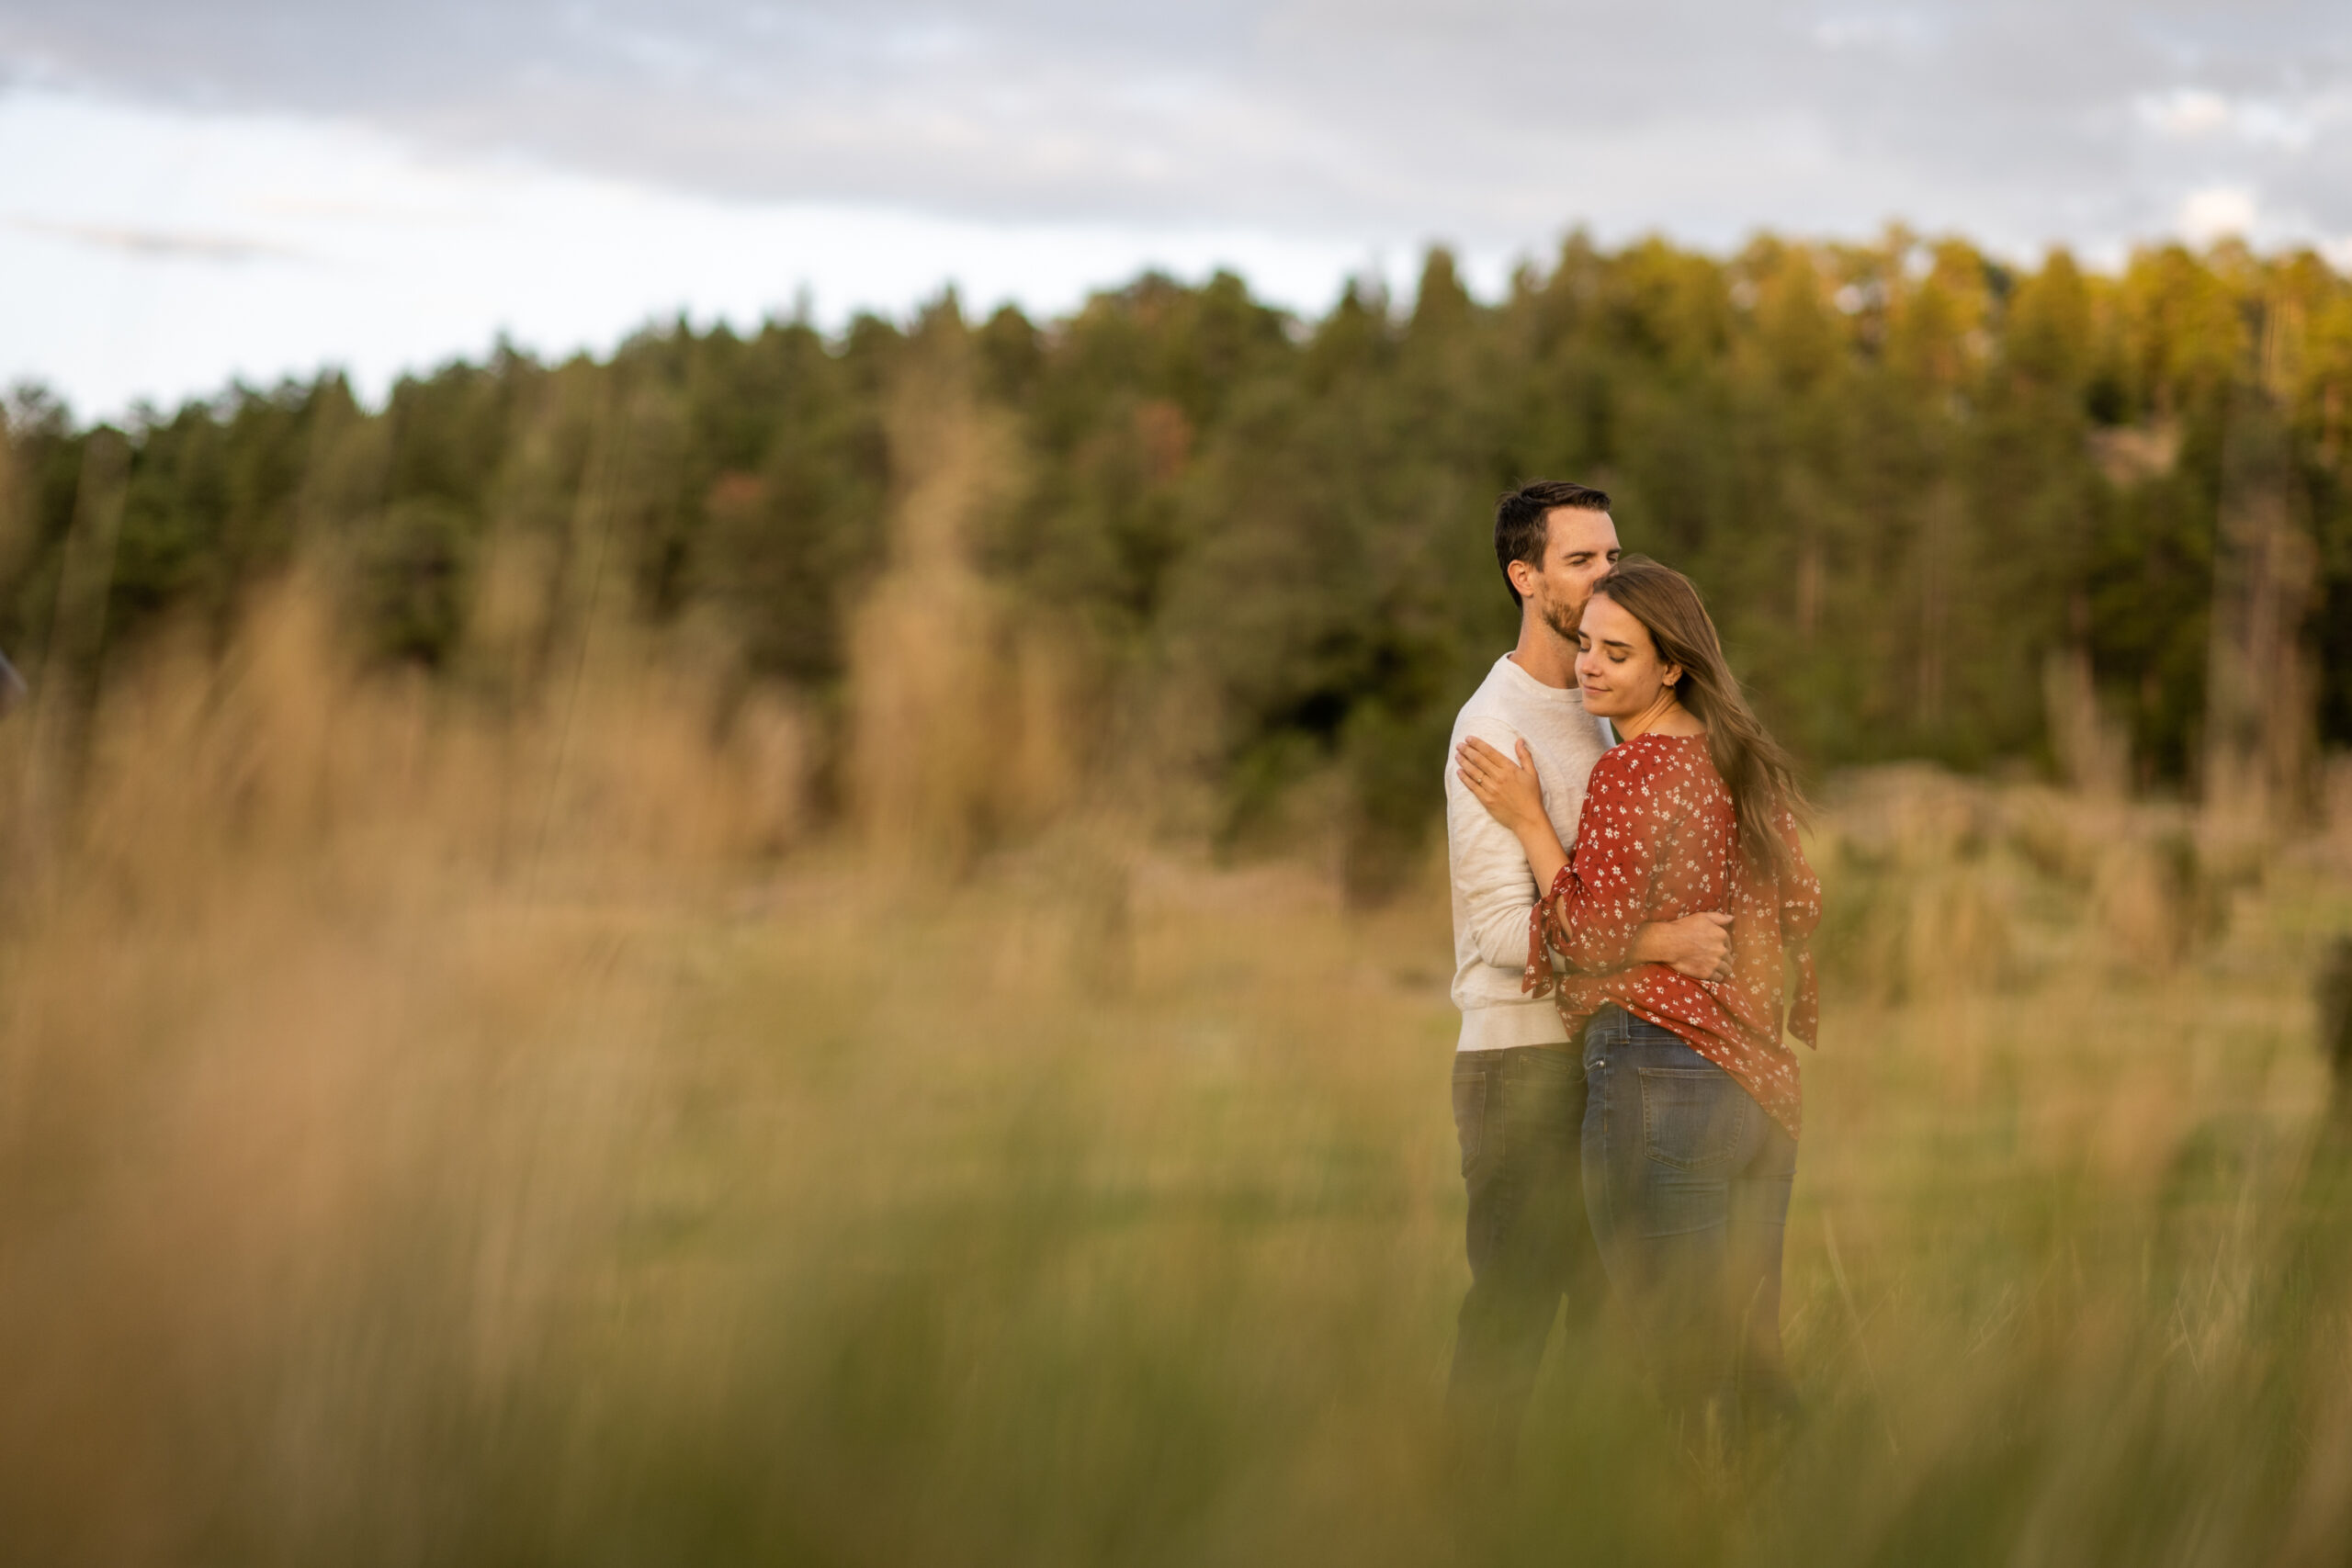 Alice and Joe hug during an engagement photo shoot at Three Sisters Park in Evergreen, Colorado.